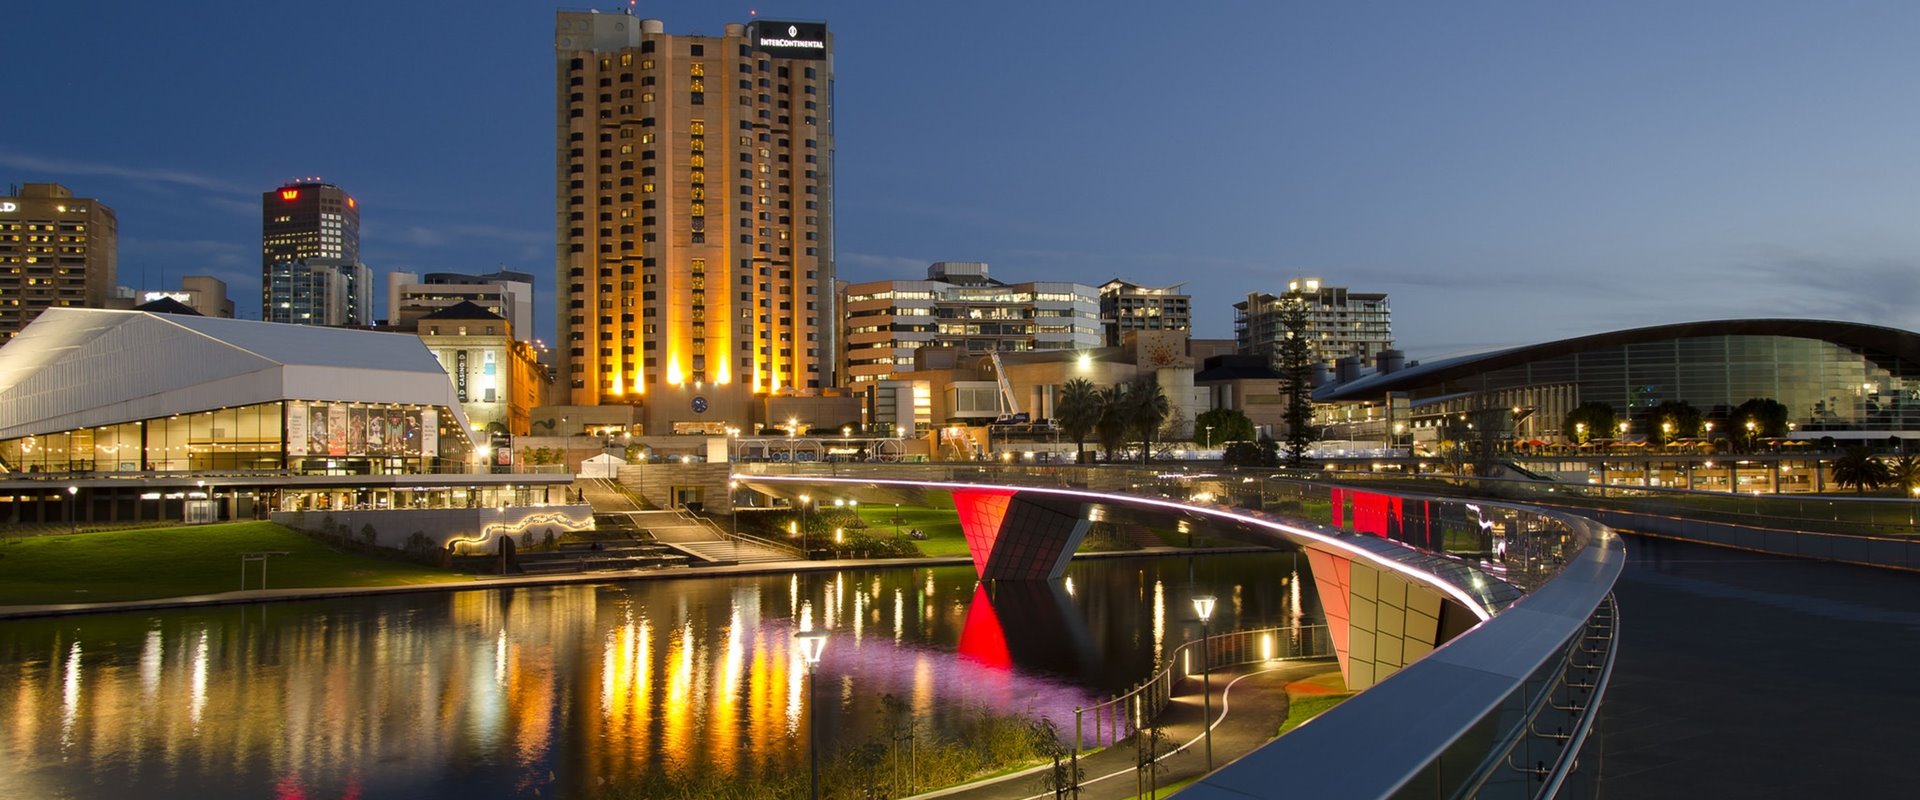 InterContinental Adelaide | Conference Venues Adelaide | Conference Venues South Australia